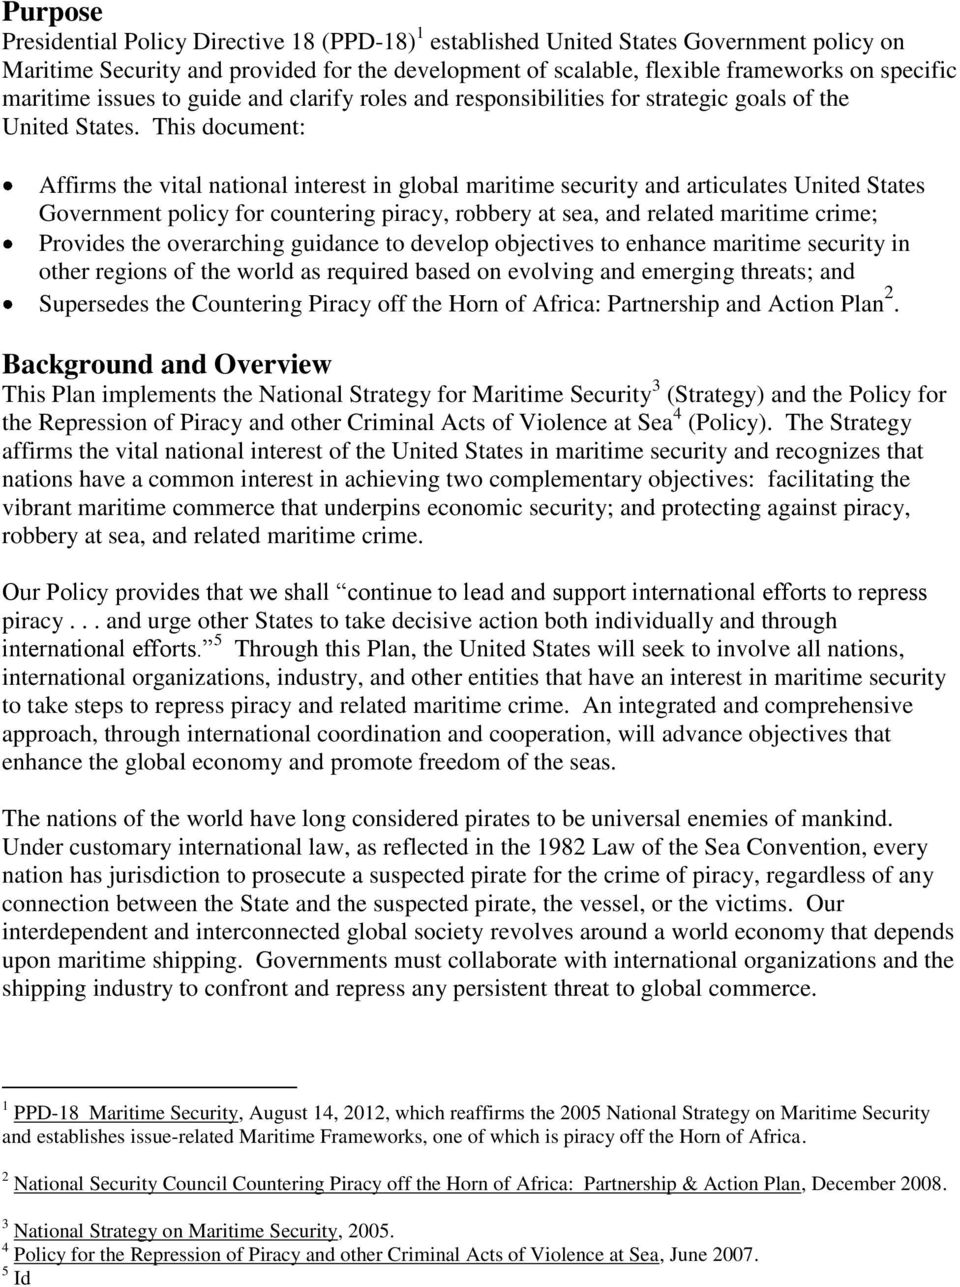 This document: Affirms the vital national interest in global maritime security and articulates United States Government policy for countering piracy, robbery at sea, and related maritime crime;